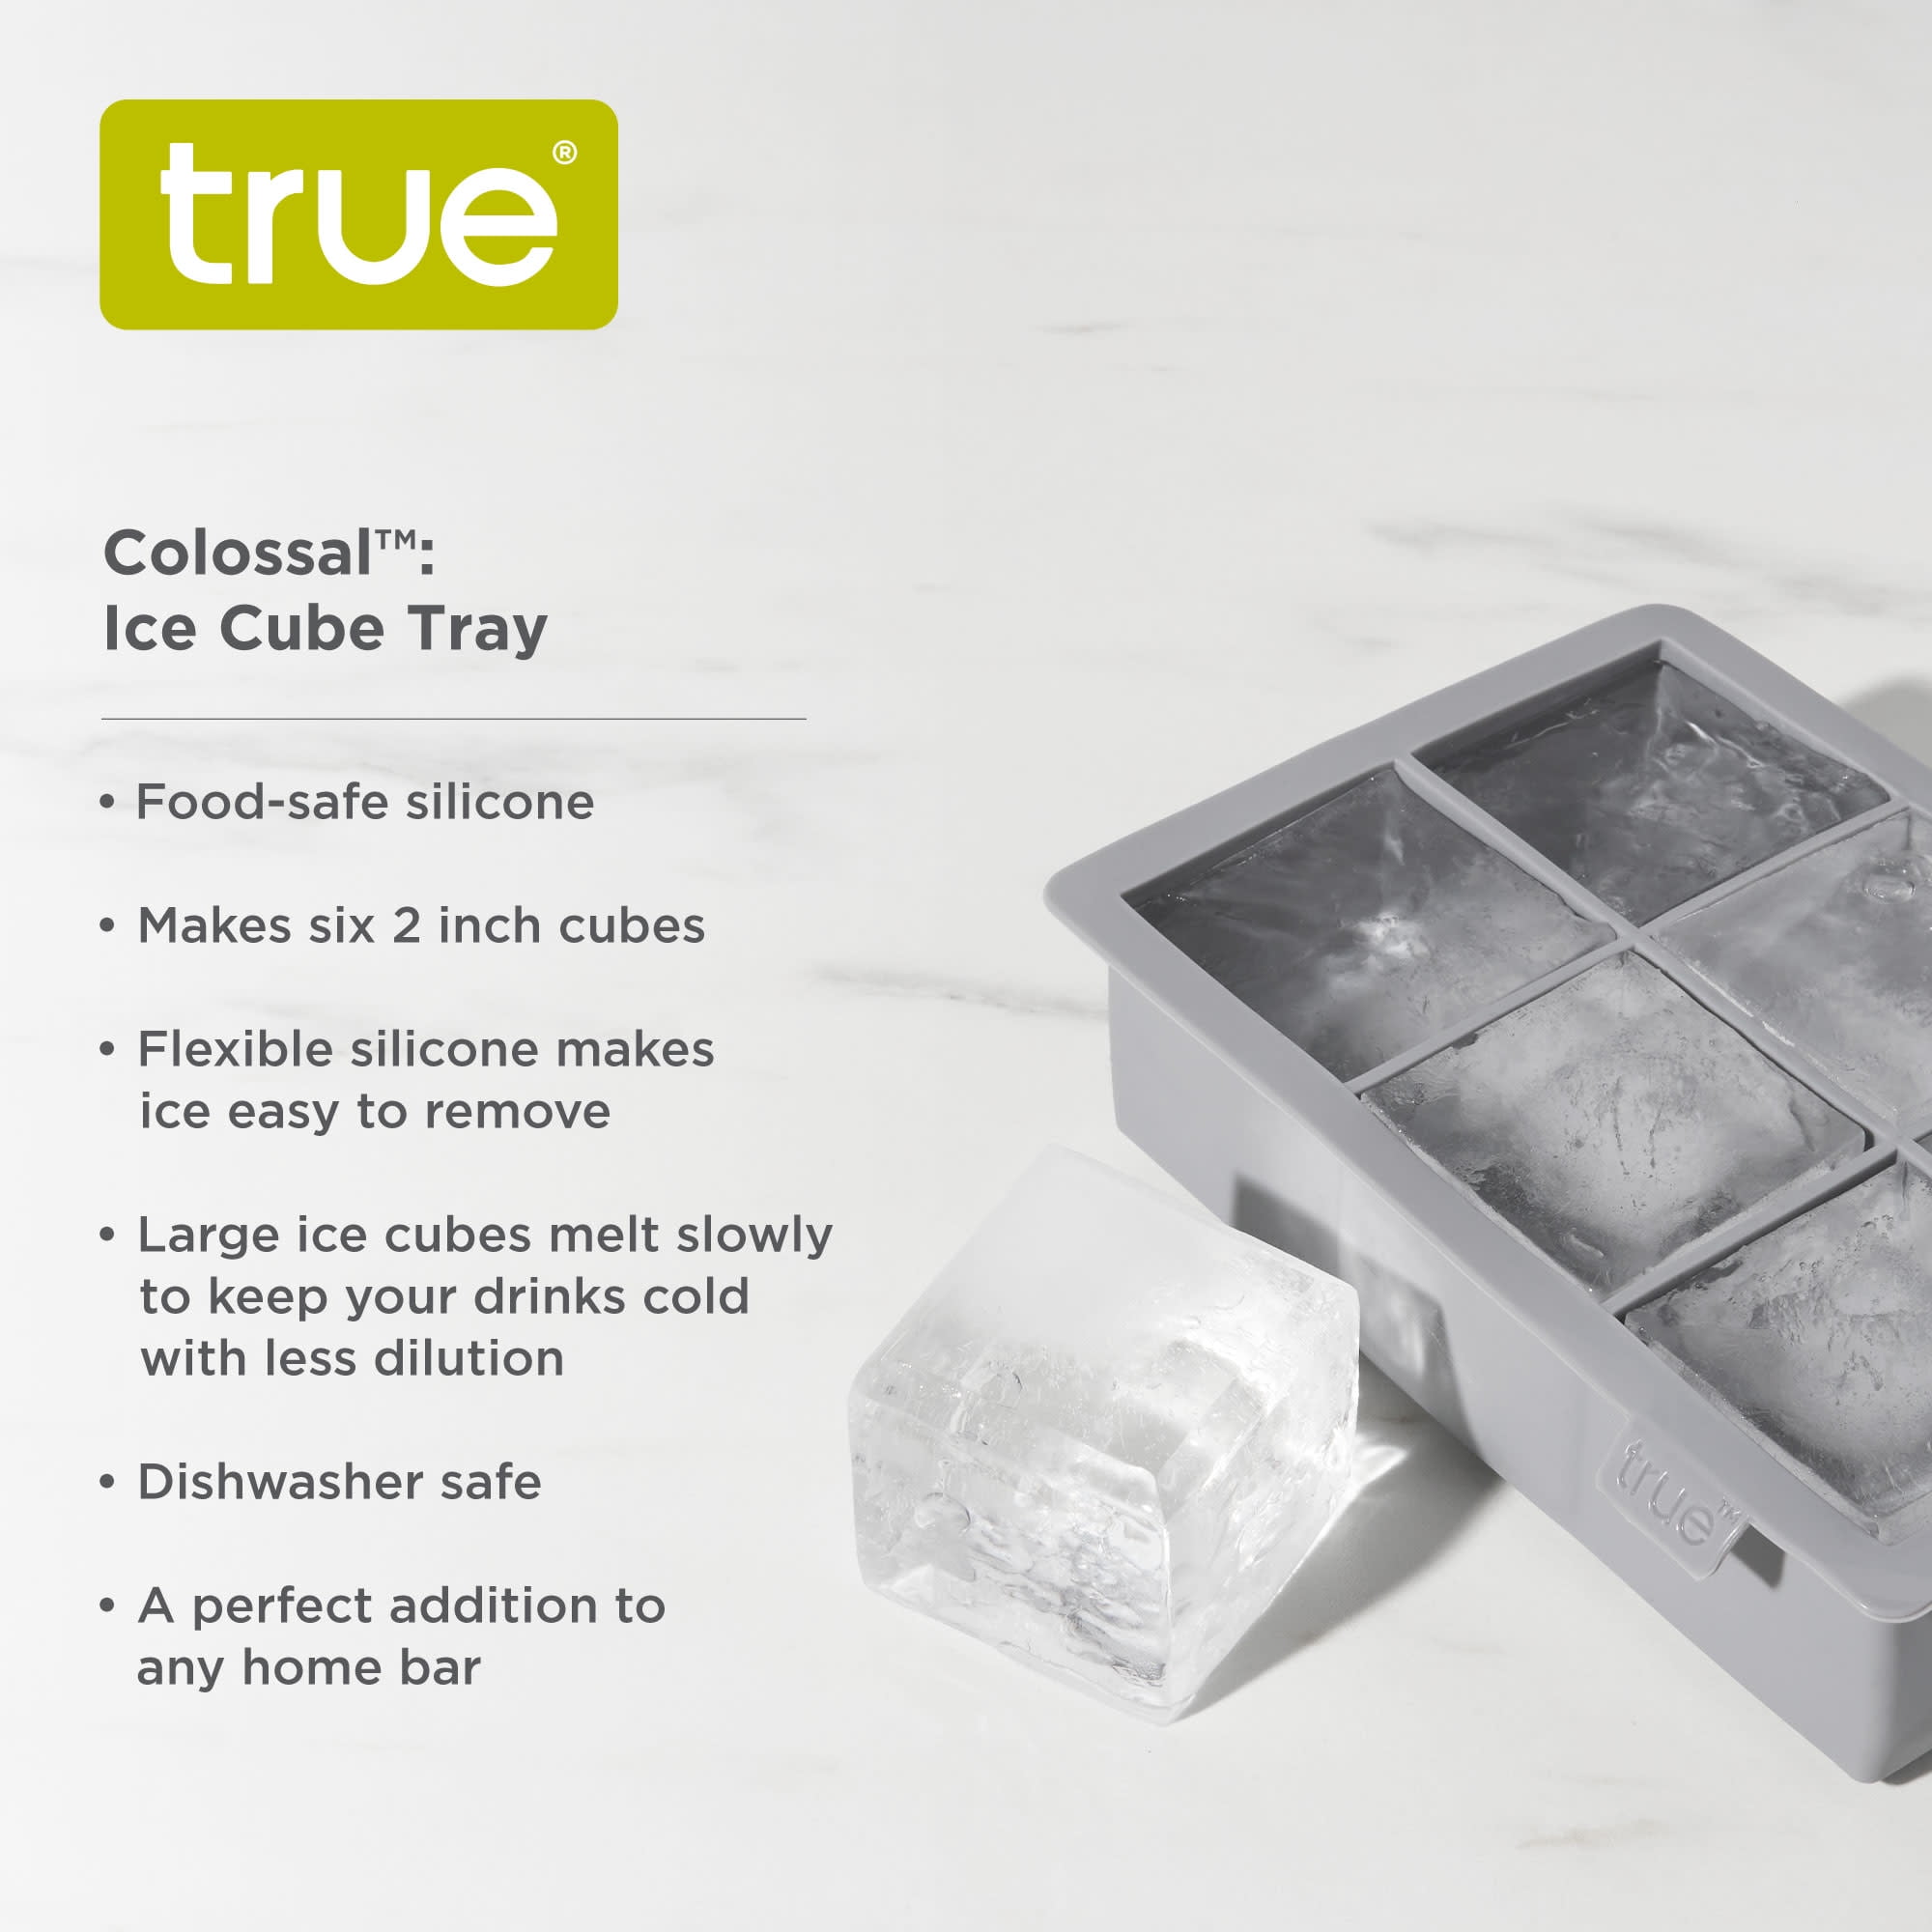 Mammoth Cubes Giant 2 Inch Ice Cube Tray - Green